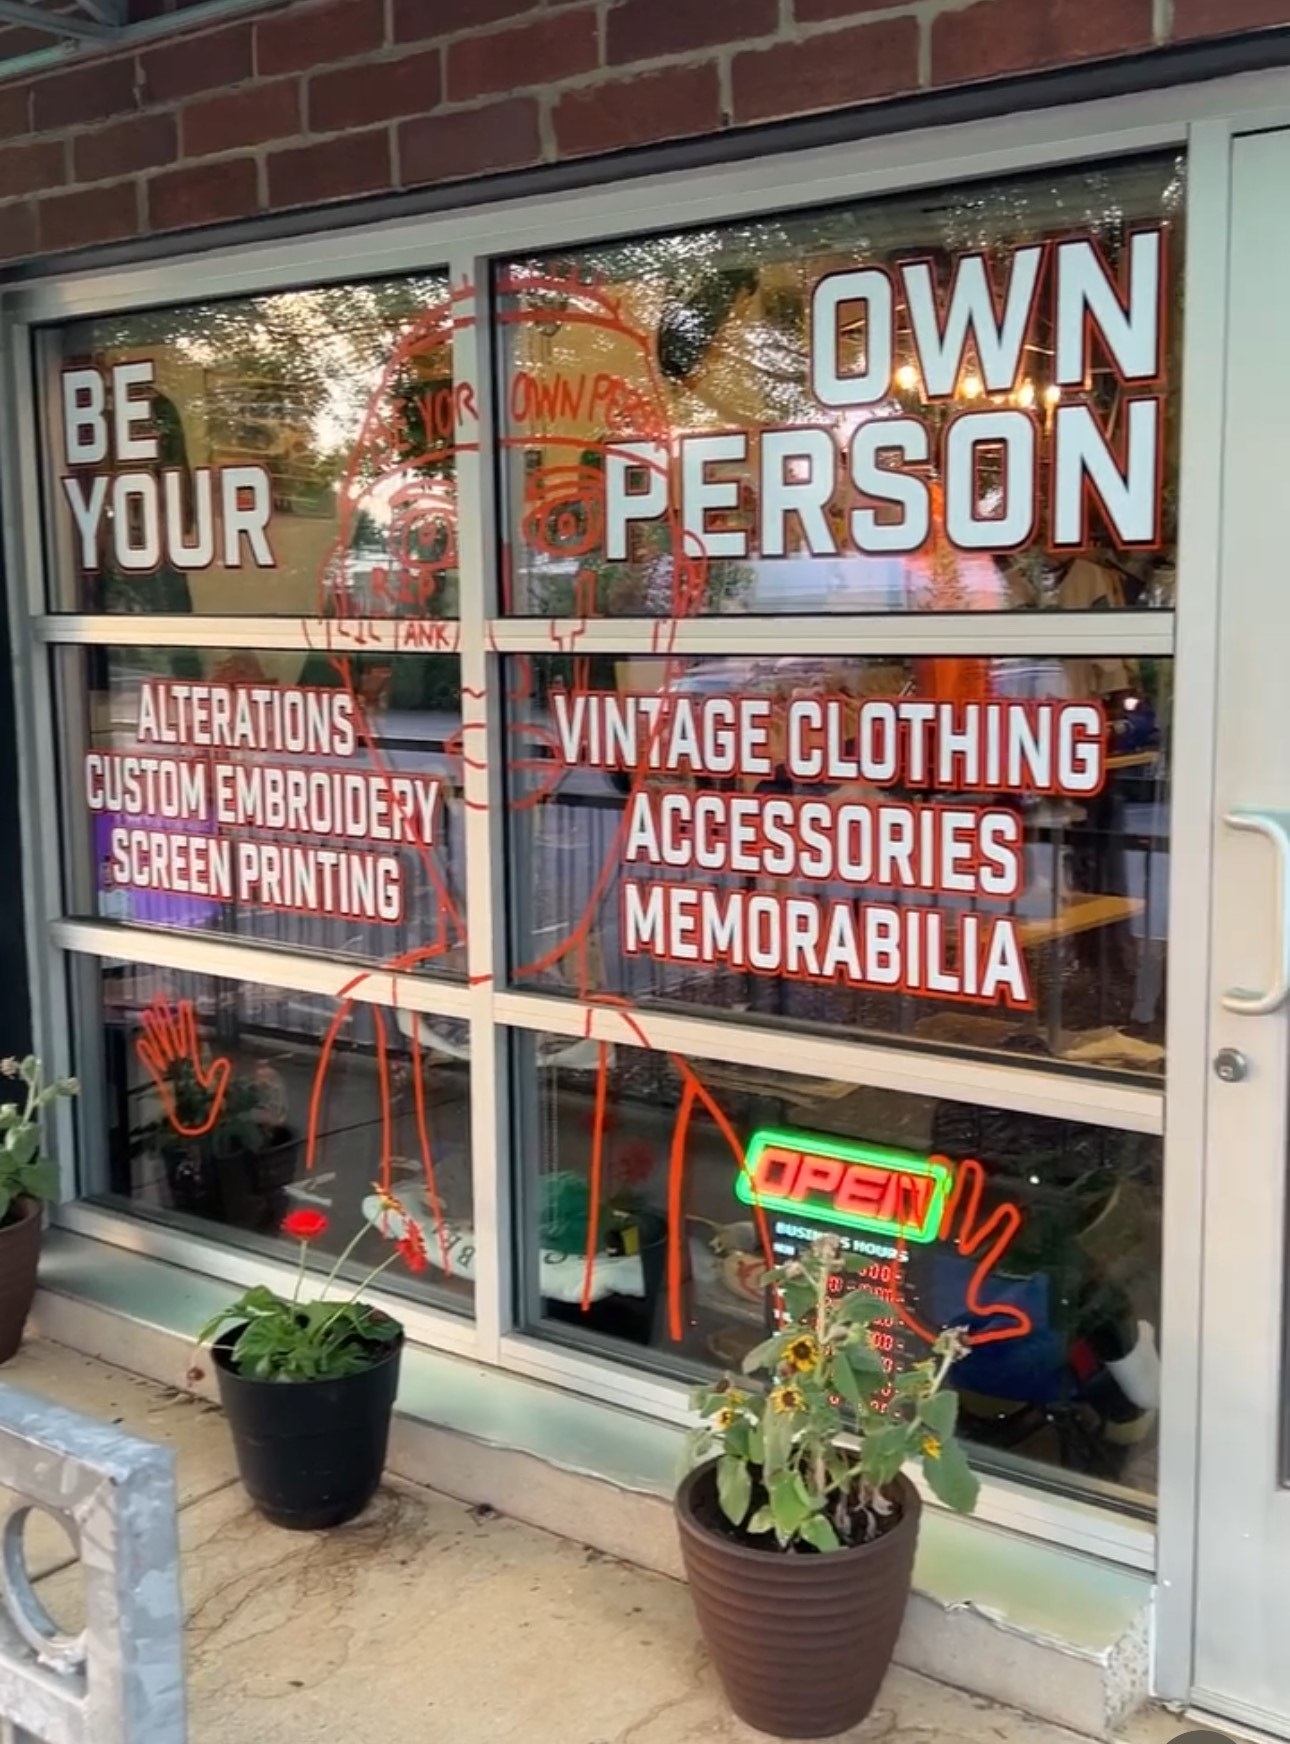 Exterior of Be Your Own Person in South End.